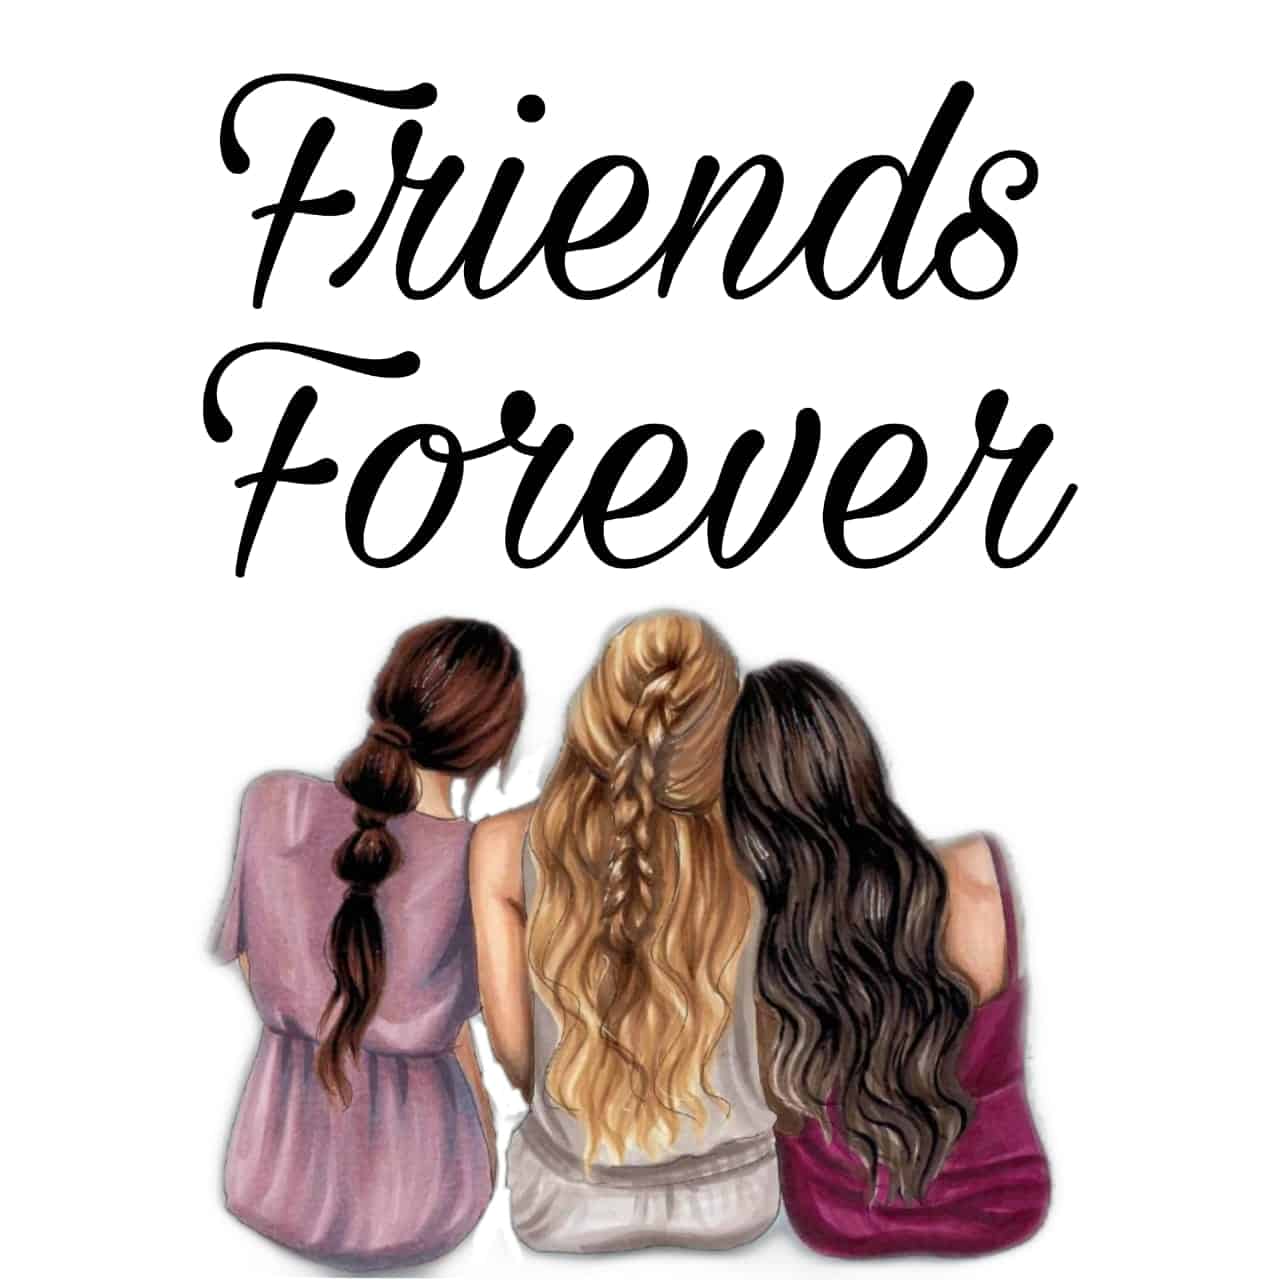 50+] Best Friends Forever DP for Whatsapp (HD) - PhotosFile